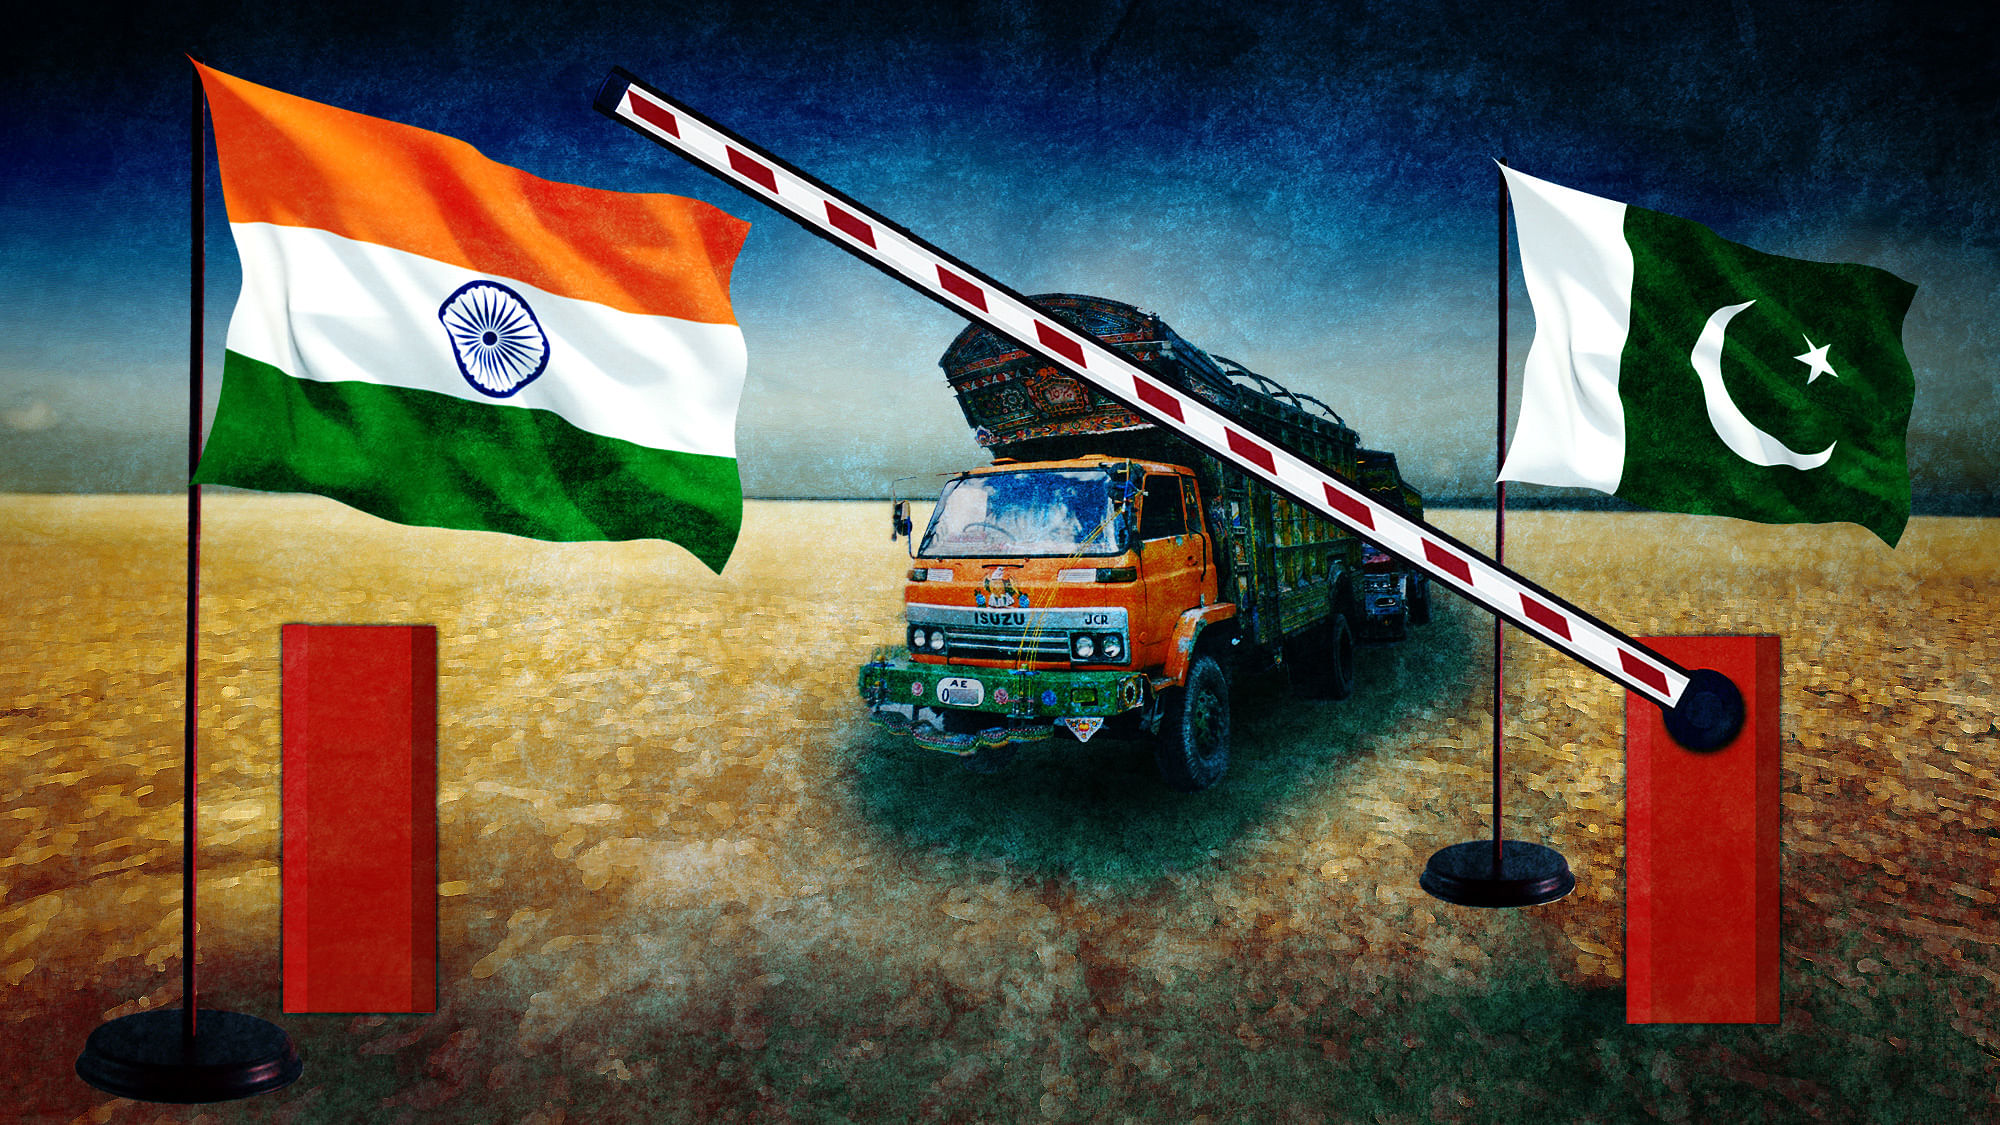 International commerce is the single most effective area that can successfully alter the bilateral foreign policy of India and Pakistan and enable them to move beyond their strained political linkages.&nbsp;(Photo: The Quint)